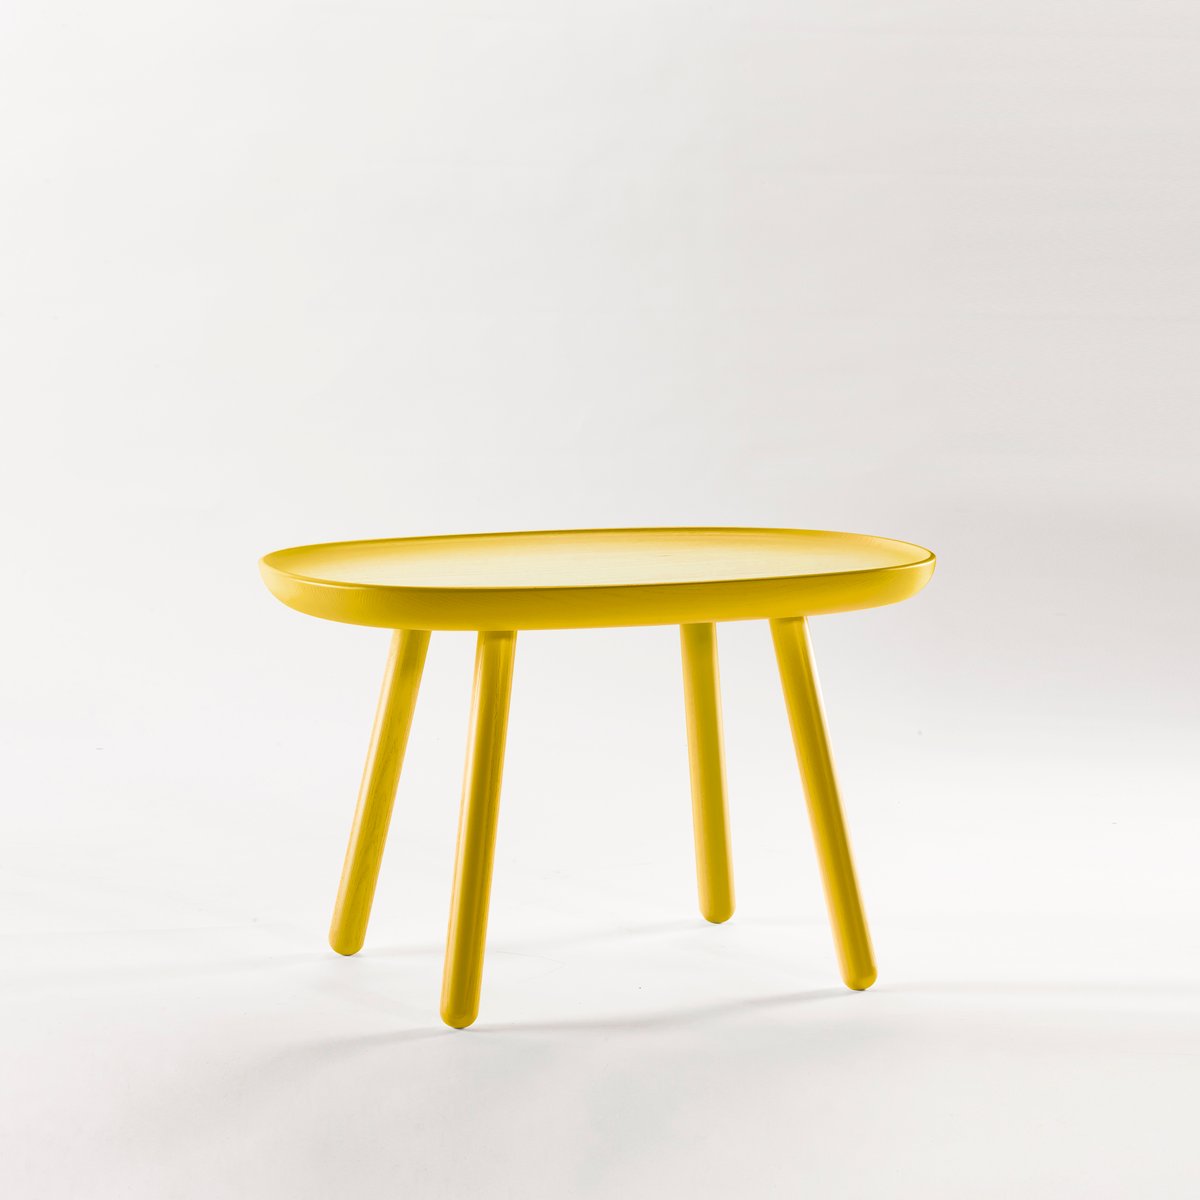 Yellow Nave Side Table D61 By Etcetc For Emko For Sale At Pamono